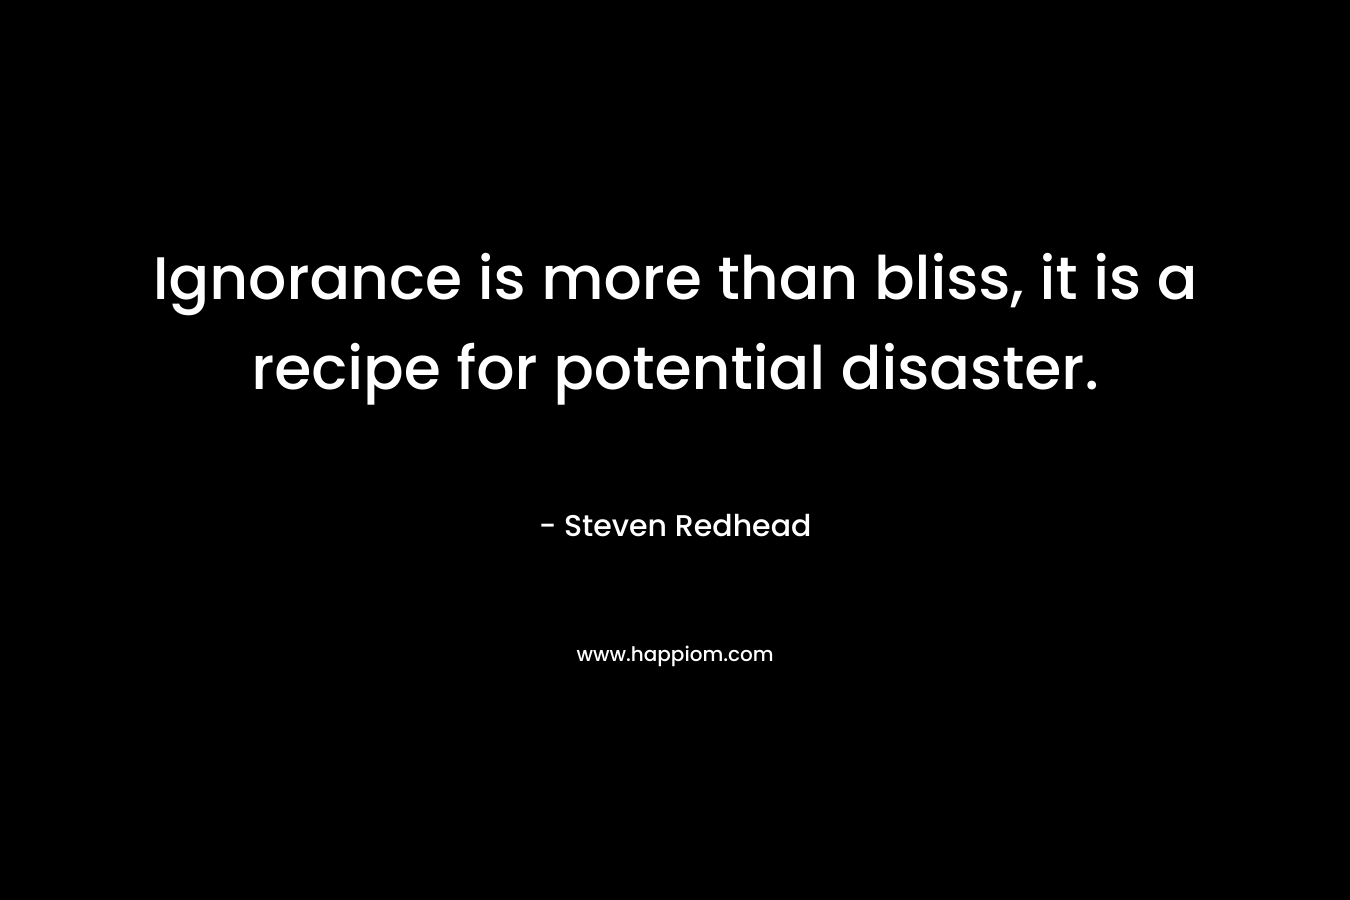 Ignorance is more than bliss, it is a recipe for potential disaster. – Steven Redhead